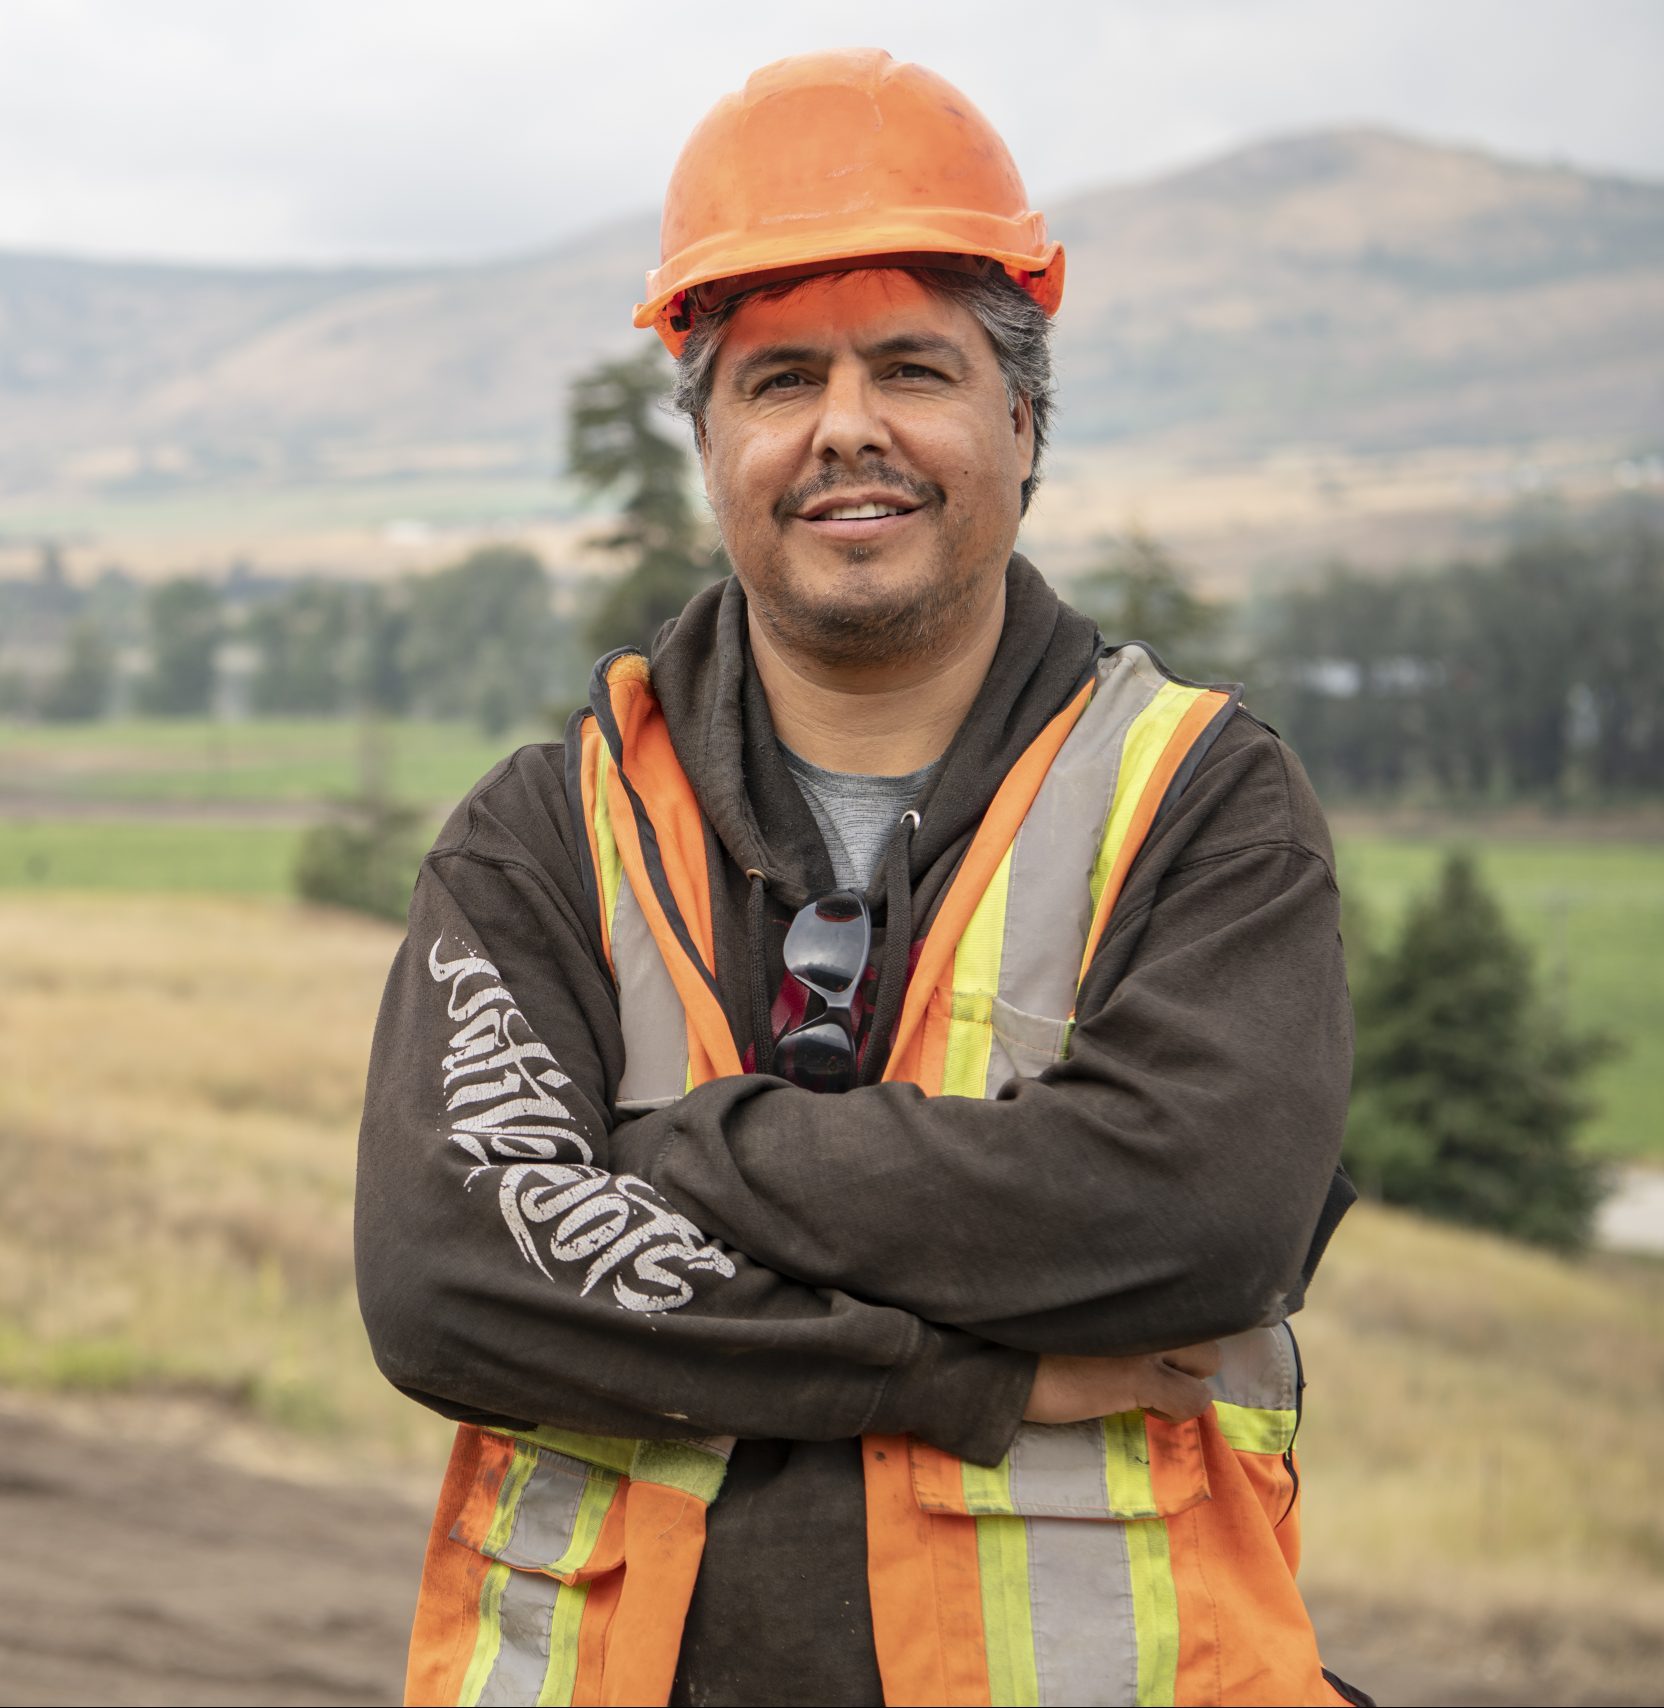 A picture of British Columbia Infrastructure Benefits employee named Andy Dennis smiling